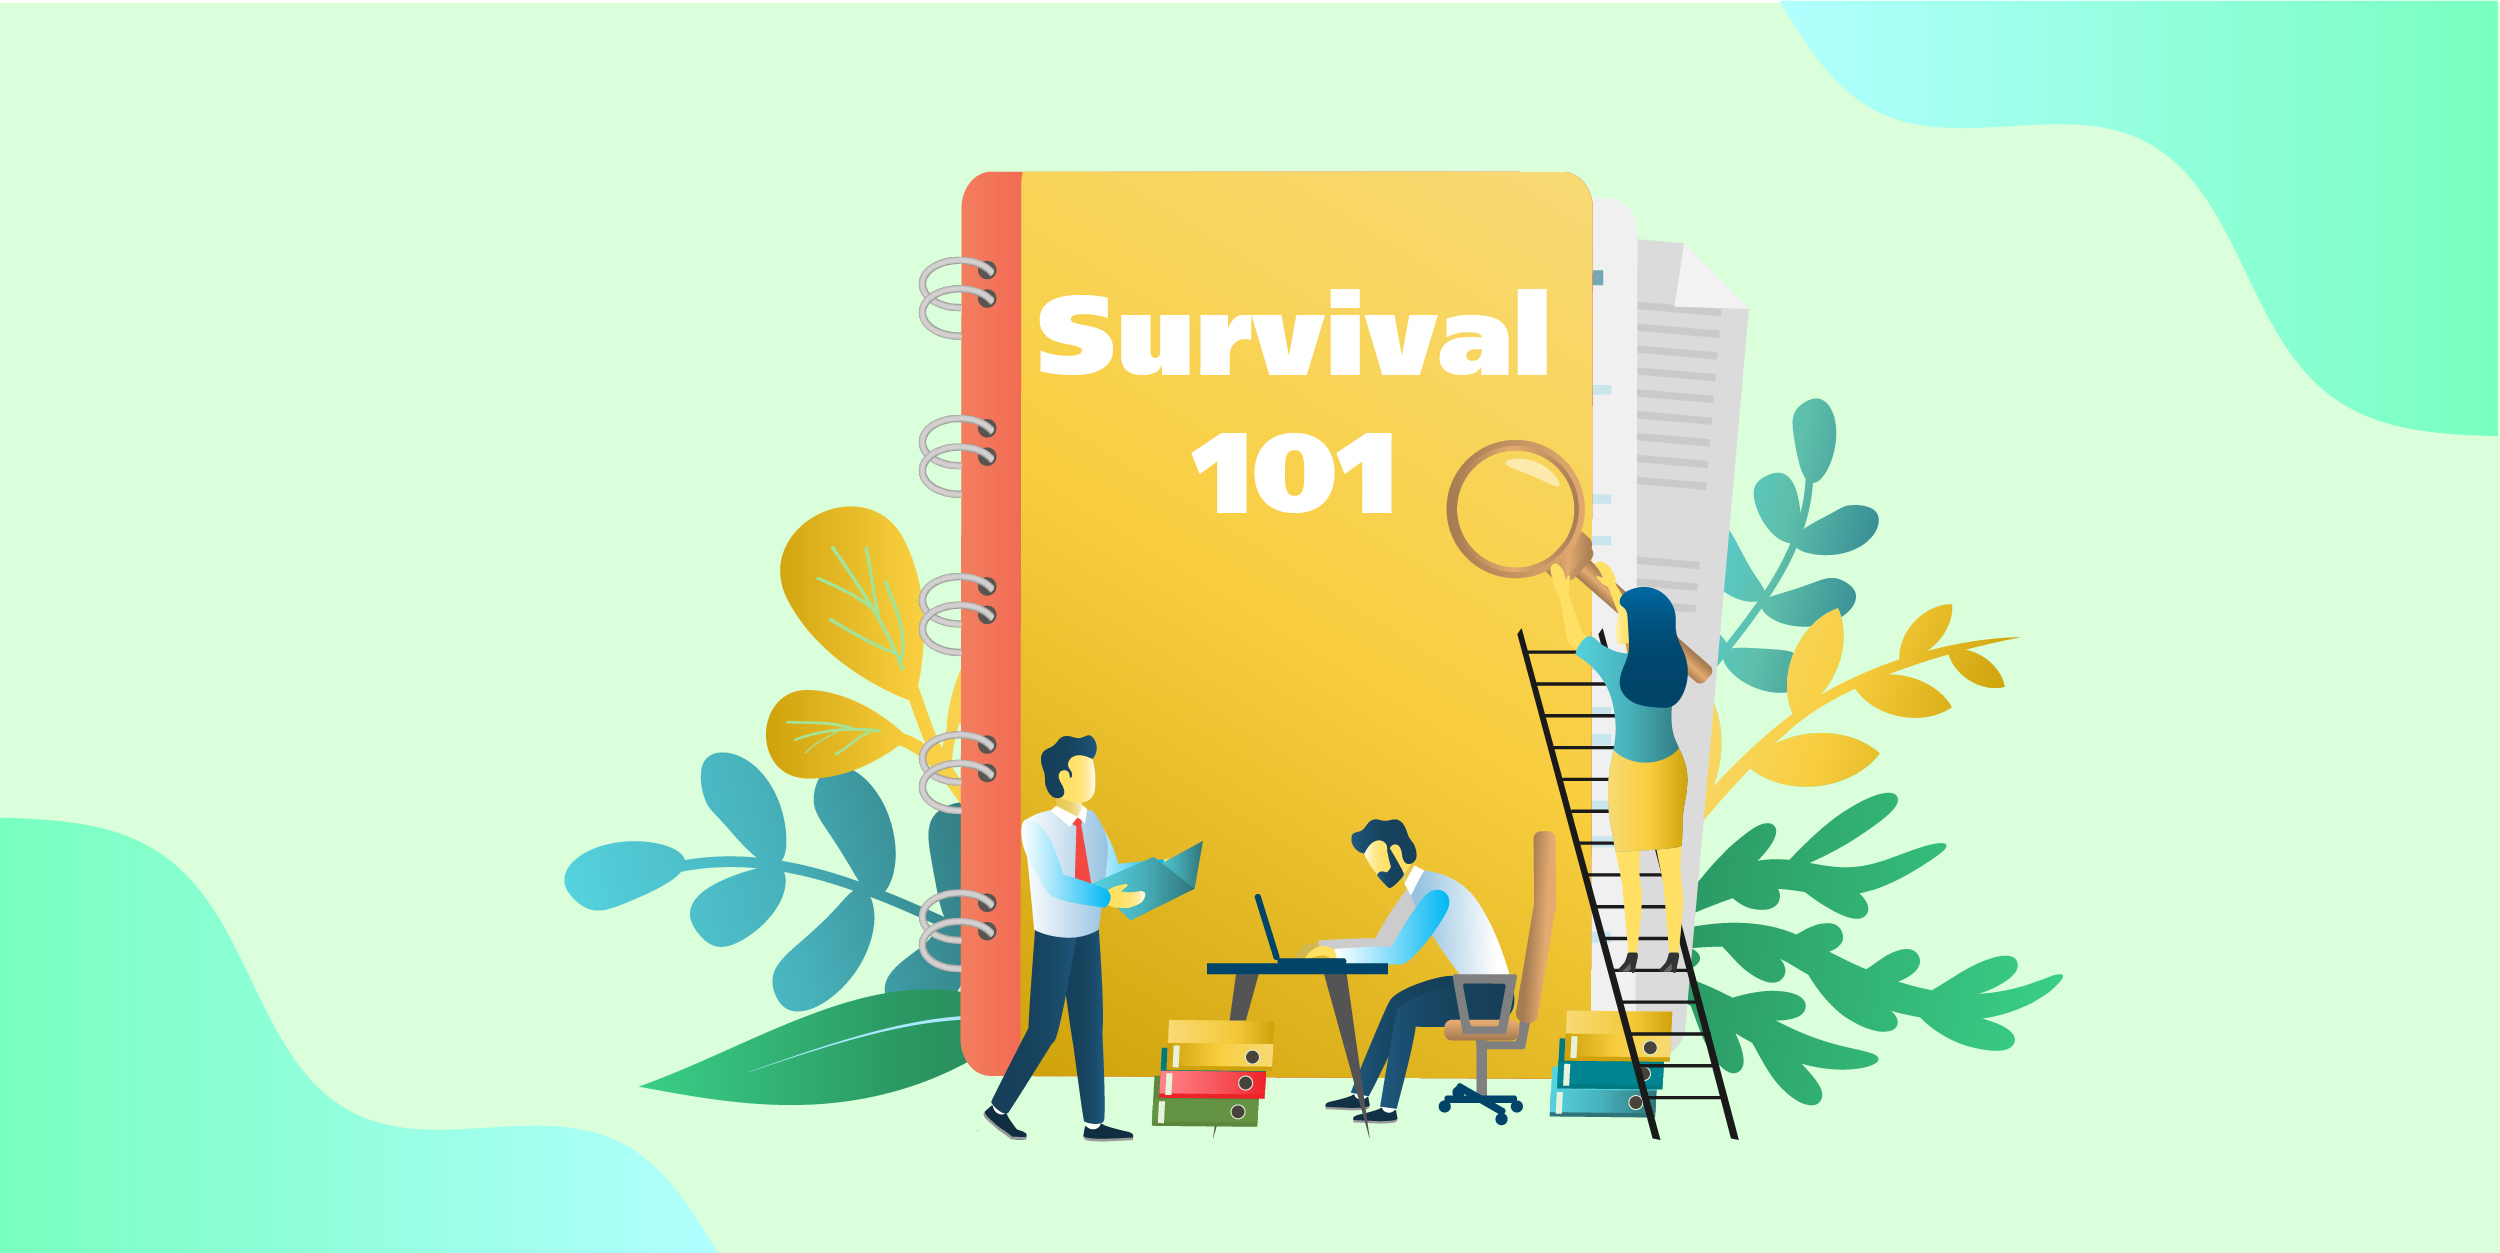 Survivor’s Guide for Product Managers in the New Norm with Covid-19